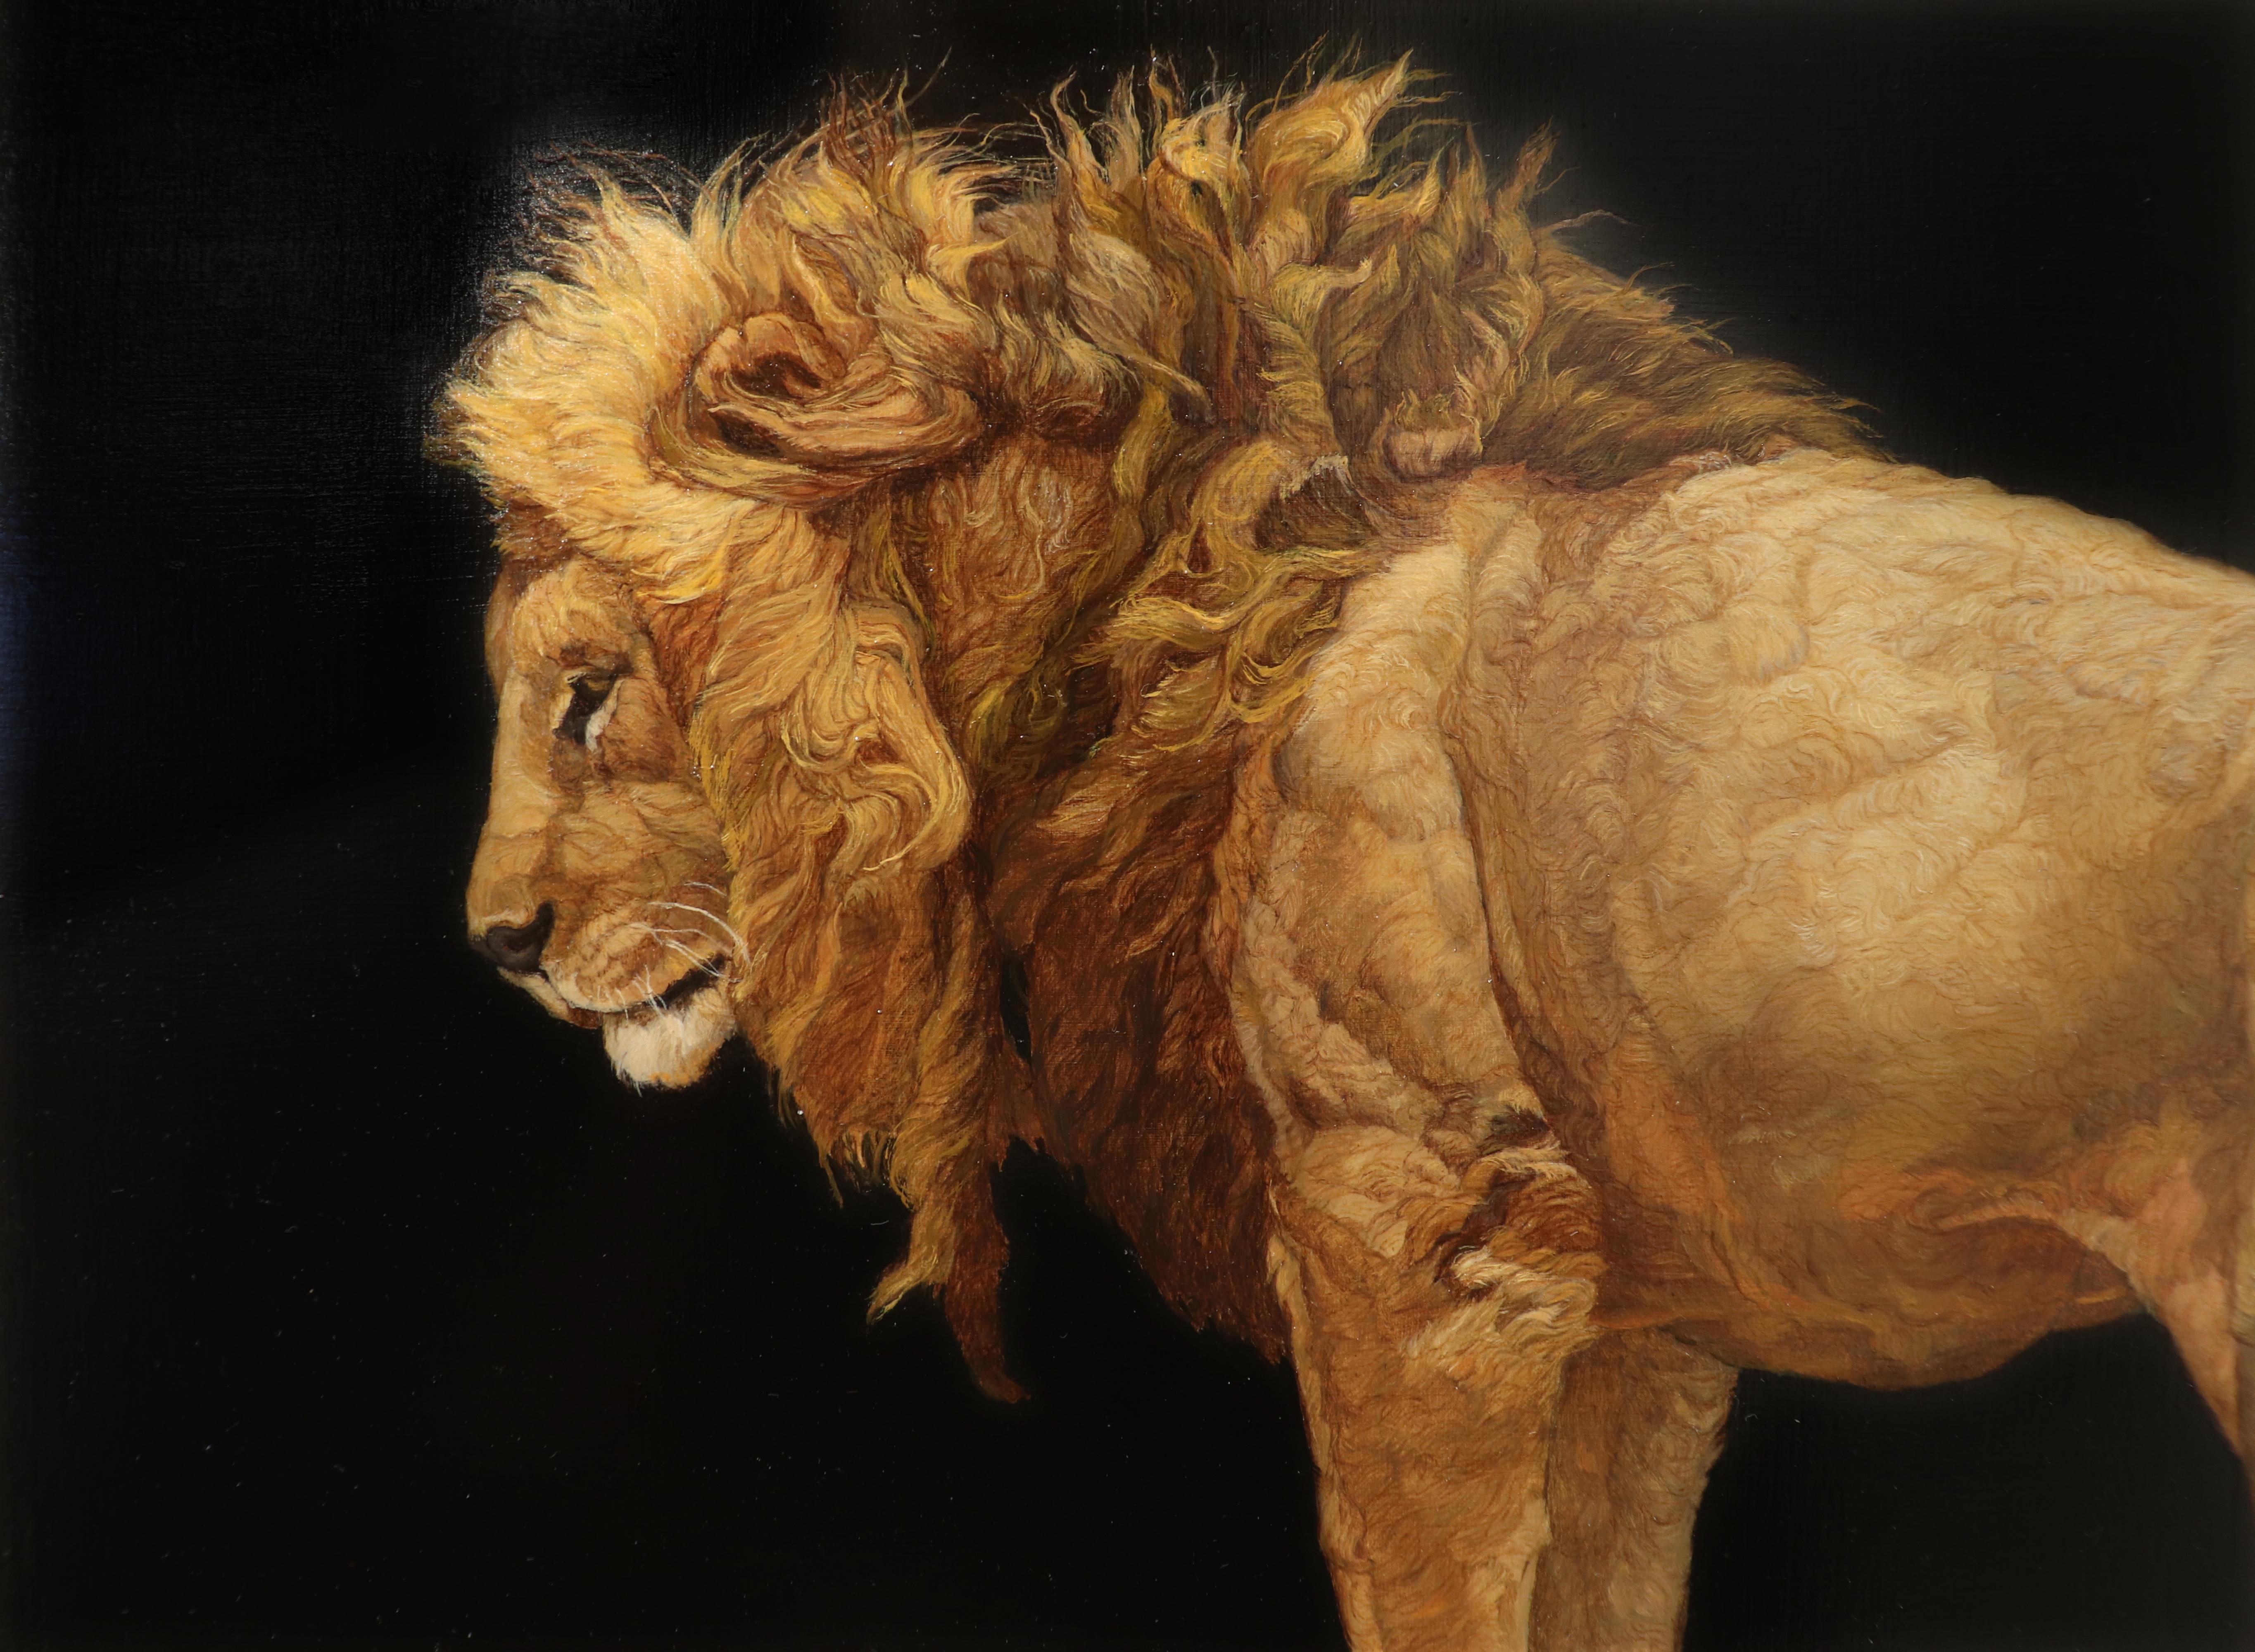 LION STANDING ON A KOPJES, Animal Portrait, Realism, Africa, Tanzania, Dark - Contemporary Painting by Patricia Traub